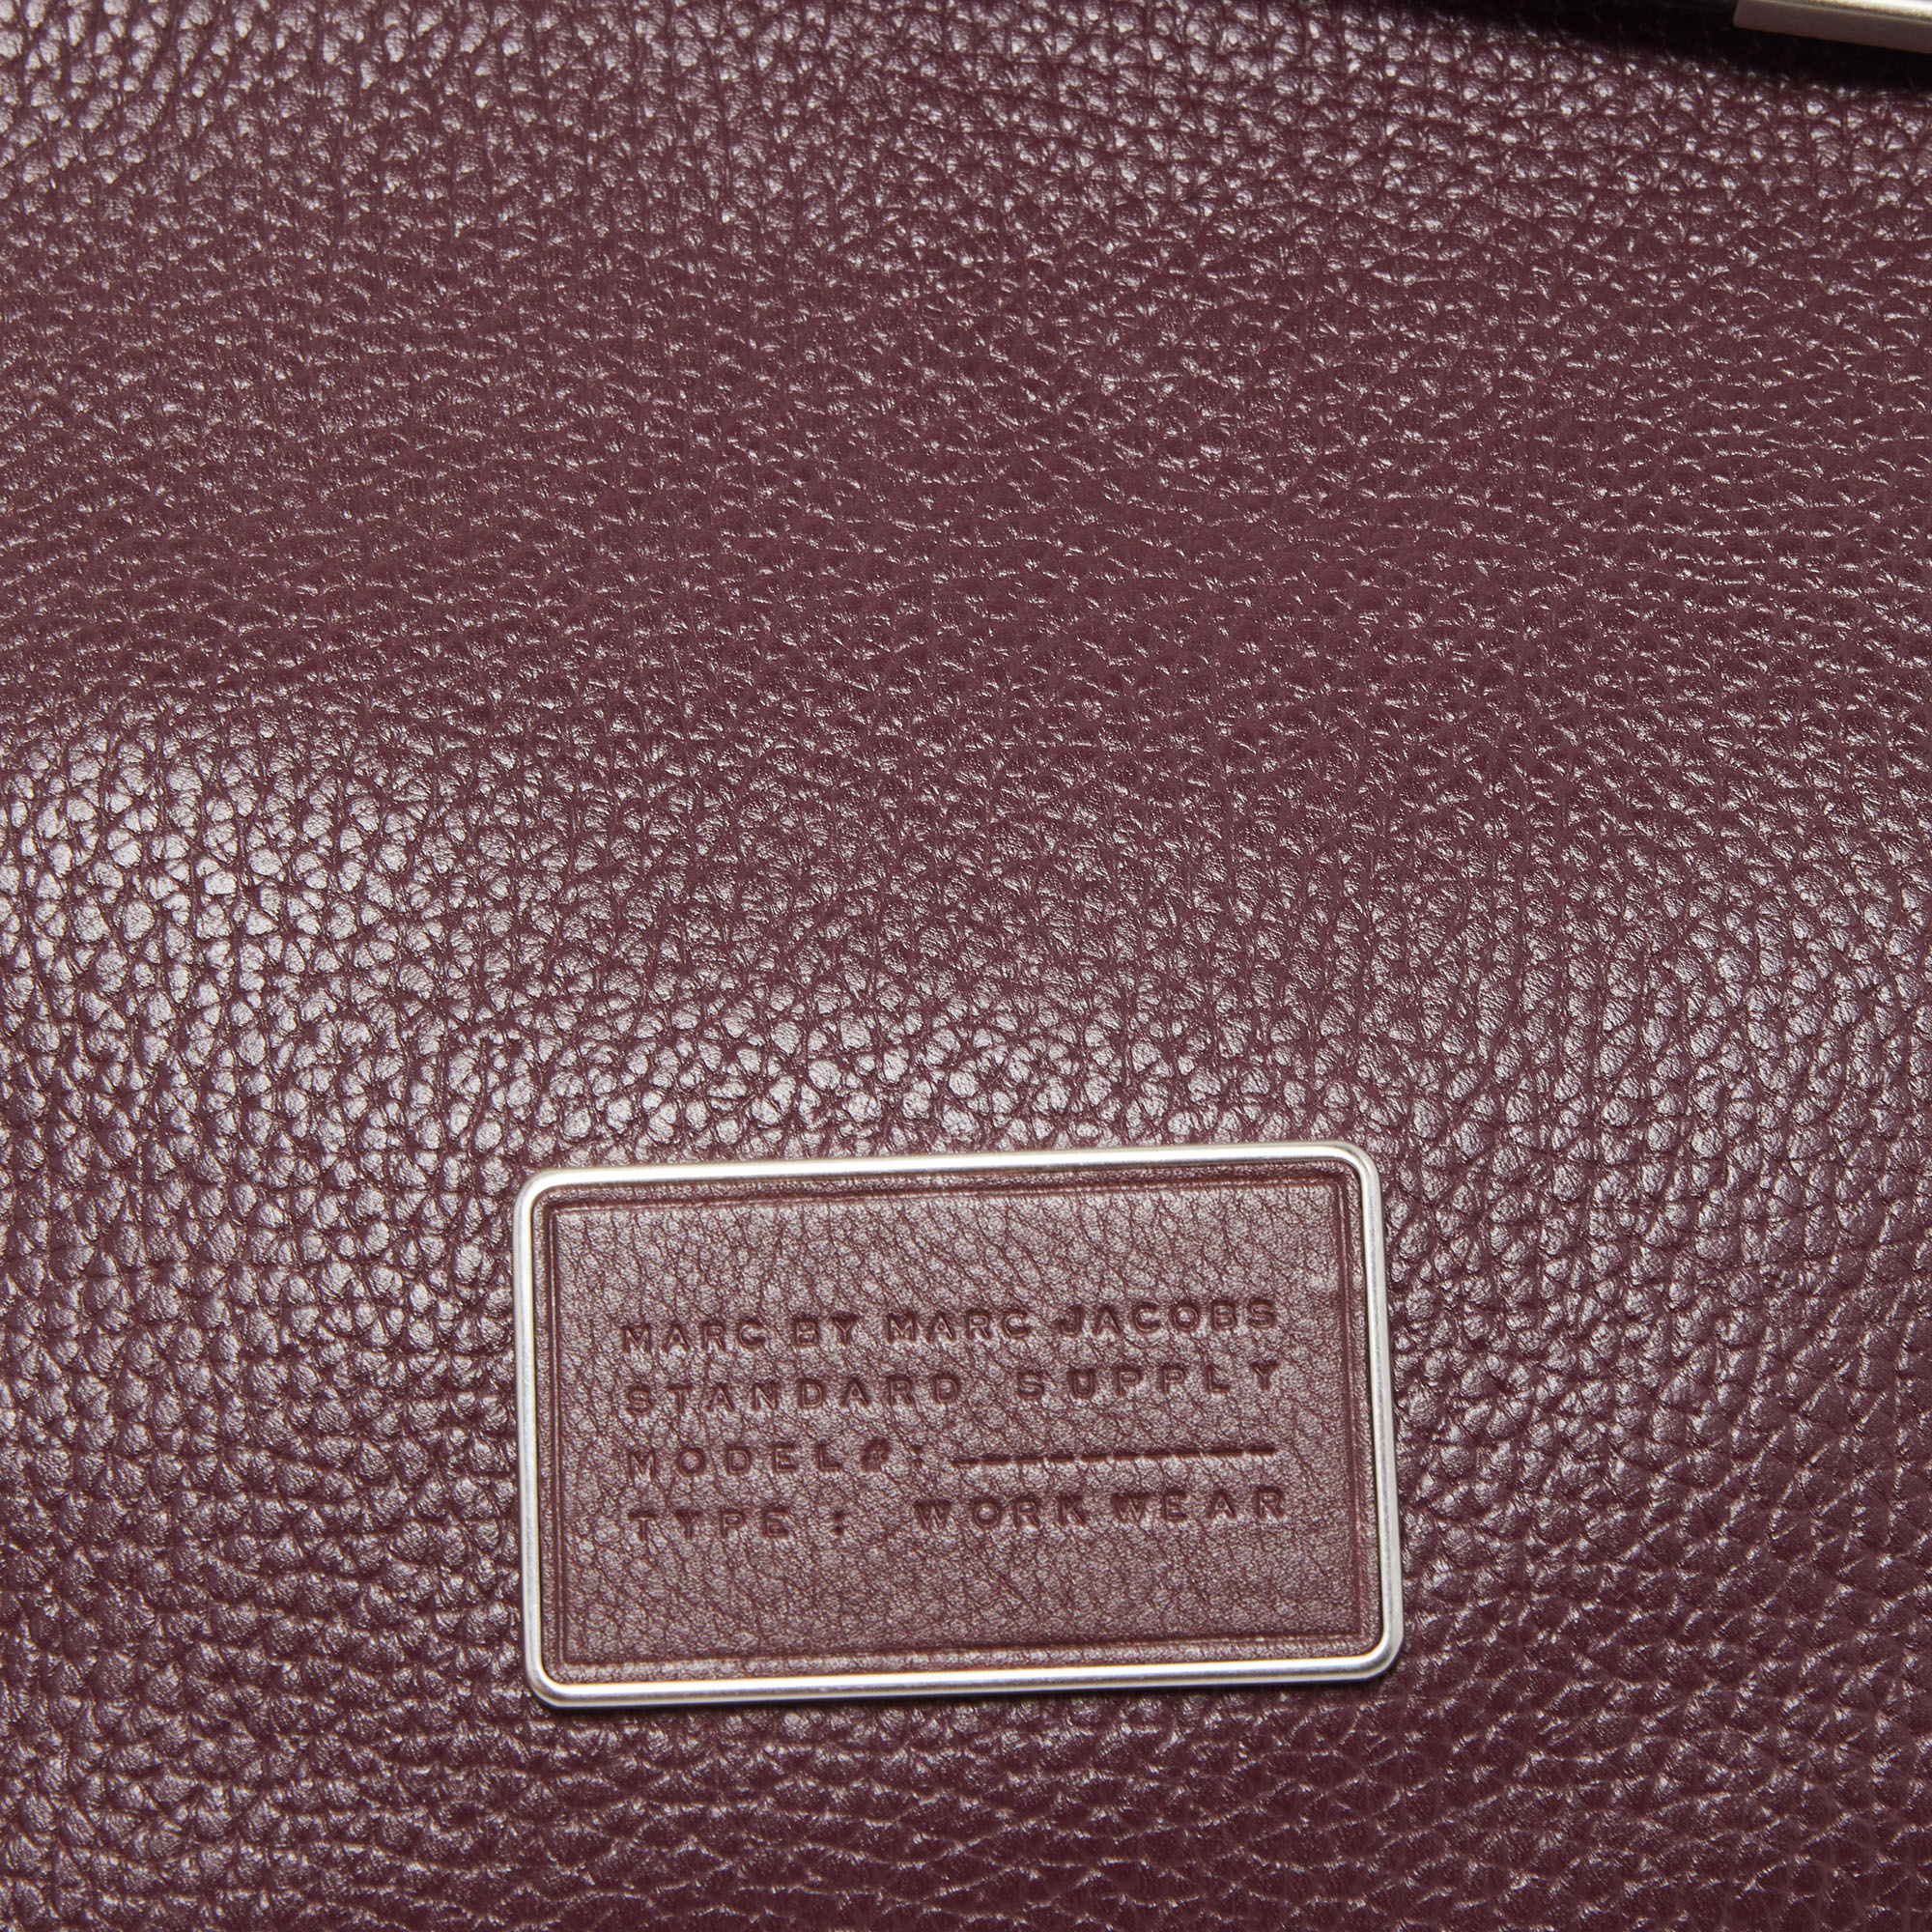 Marc By Marc Jacobs Plum Leather Ligero Double Percy Crossbody Bag